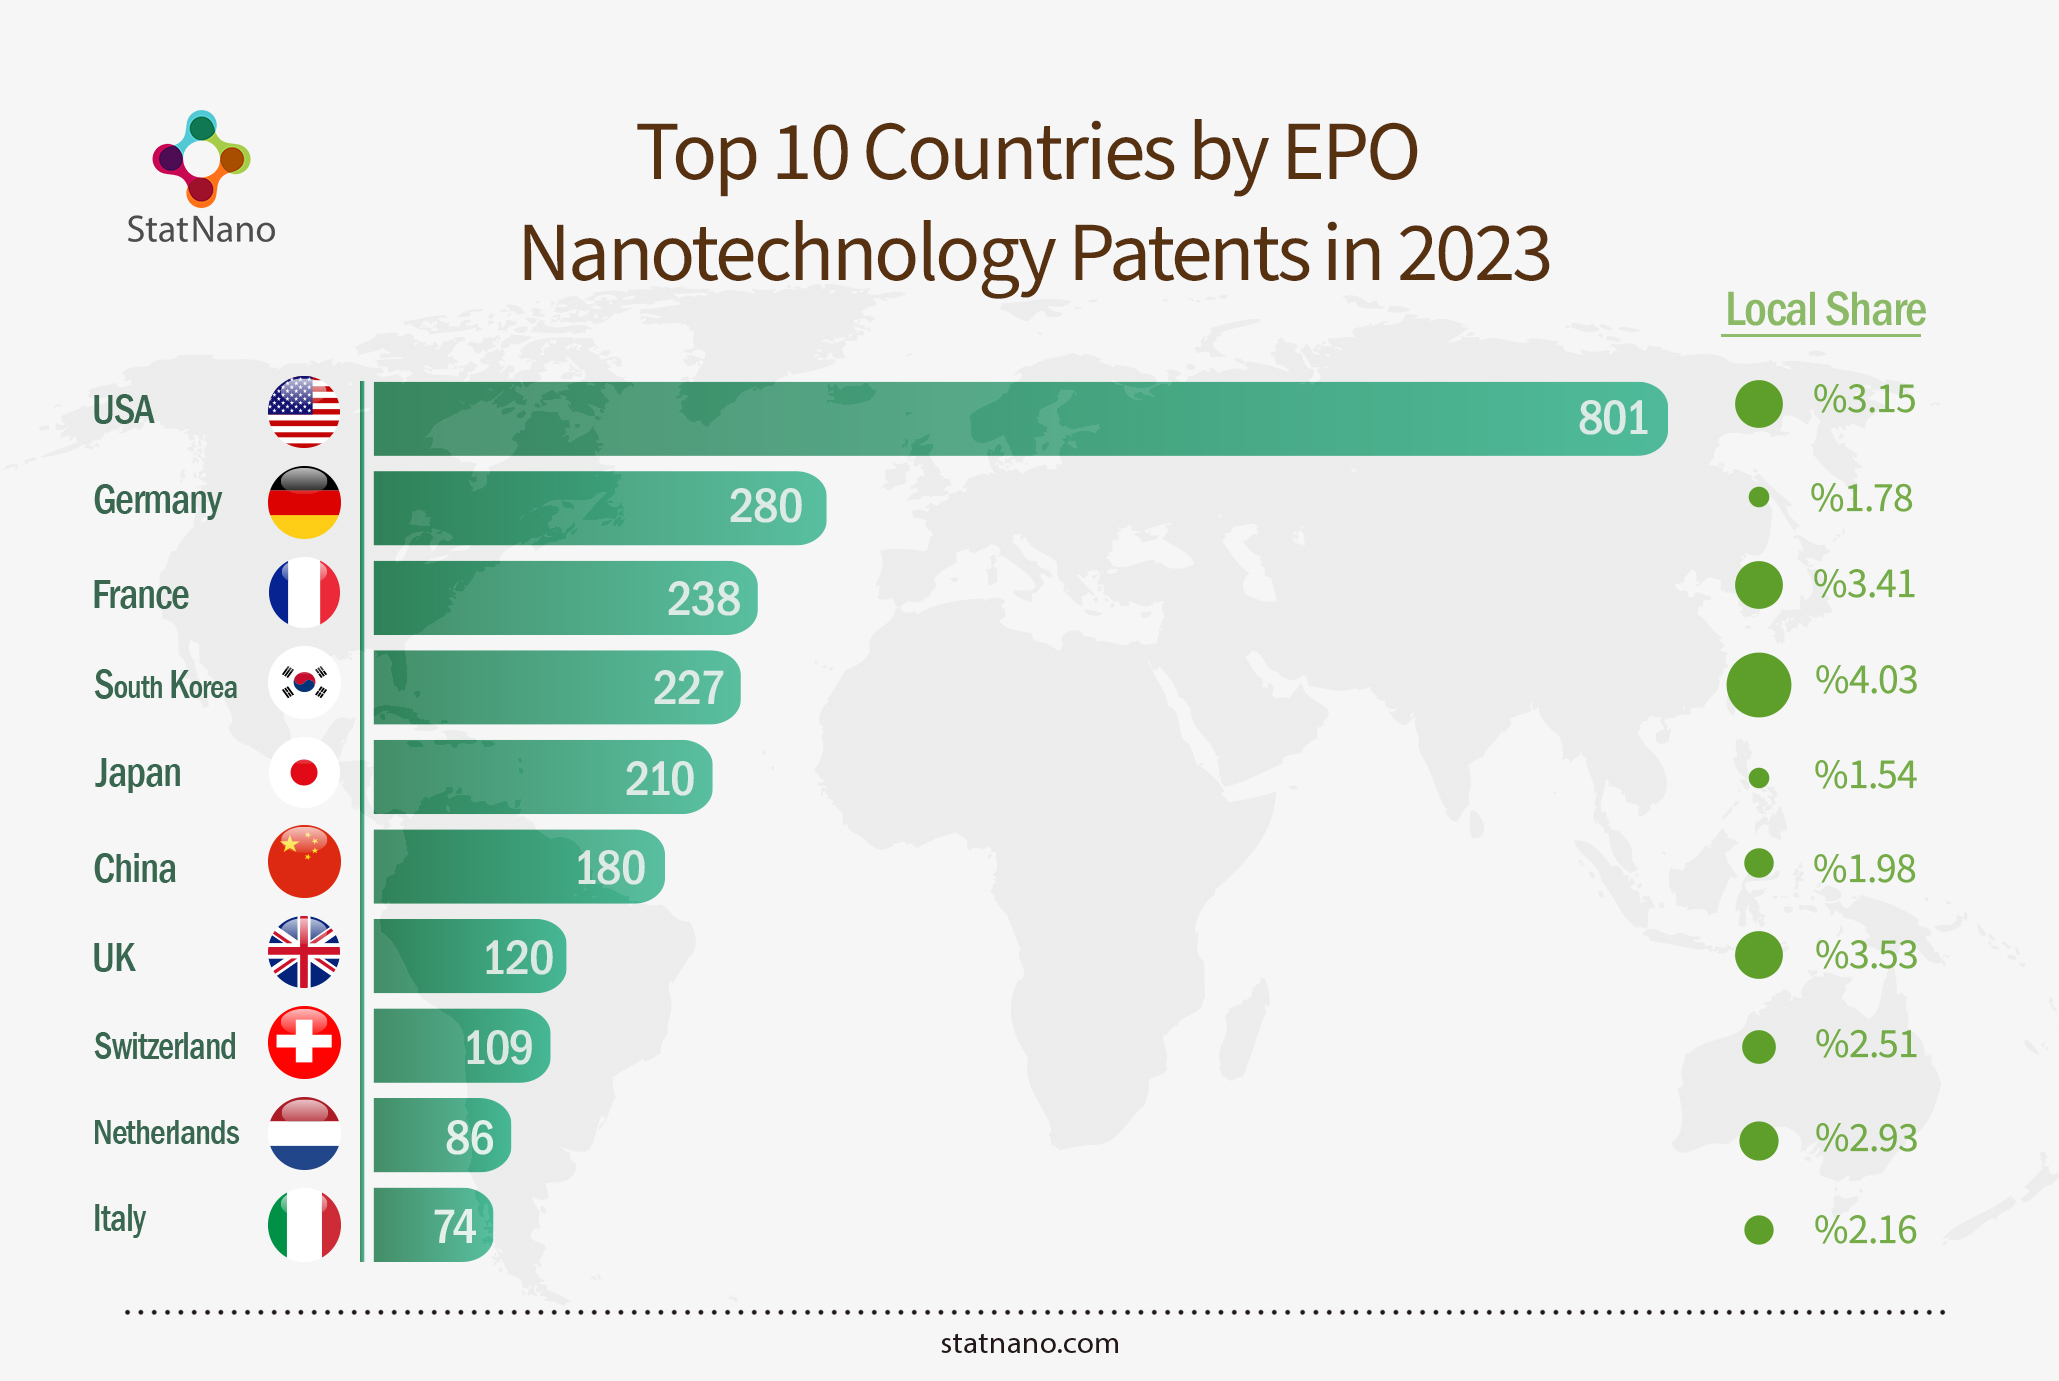 Top 10 Countries by EPO Nanotechnology Patents in 2023